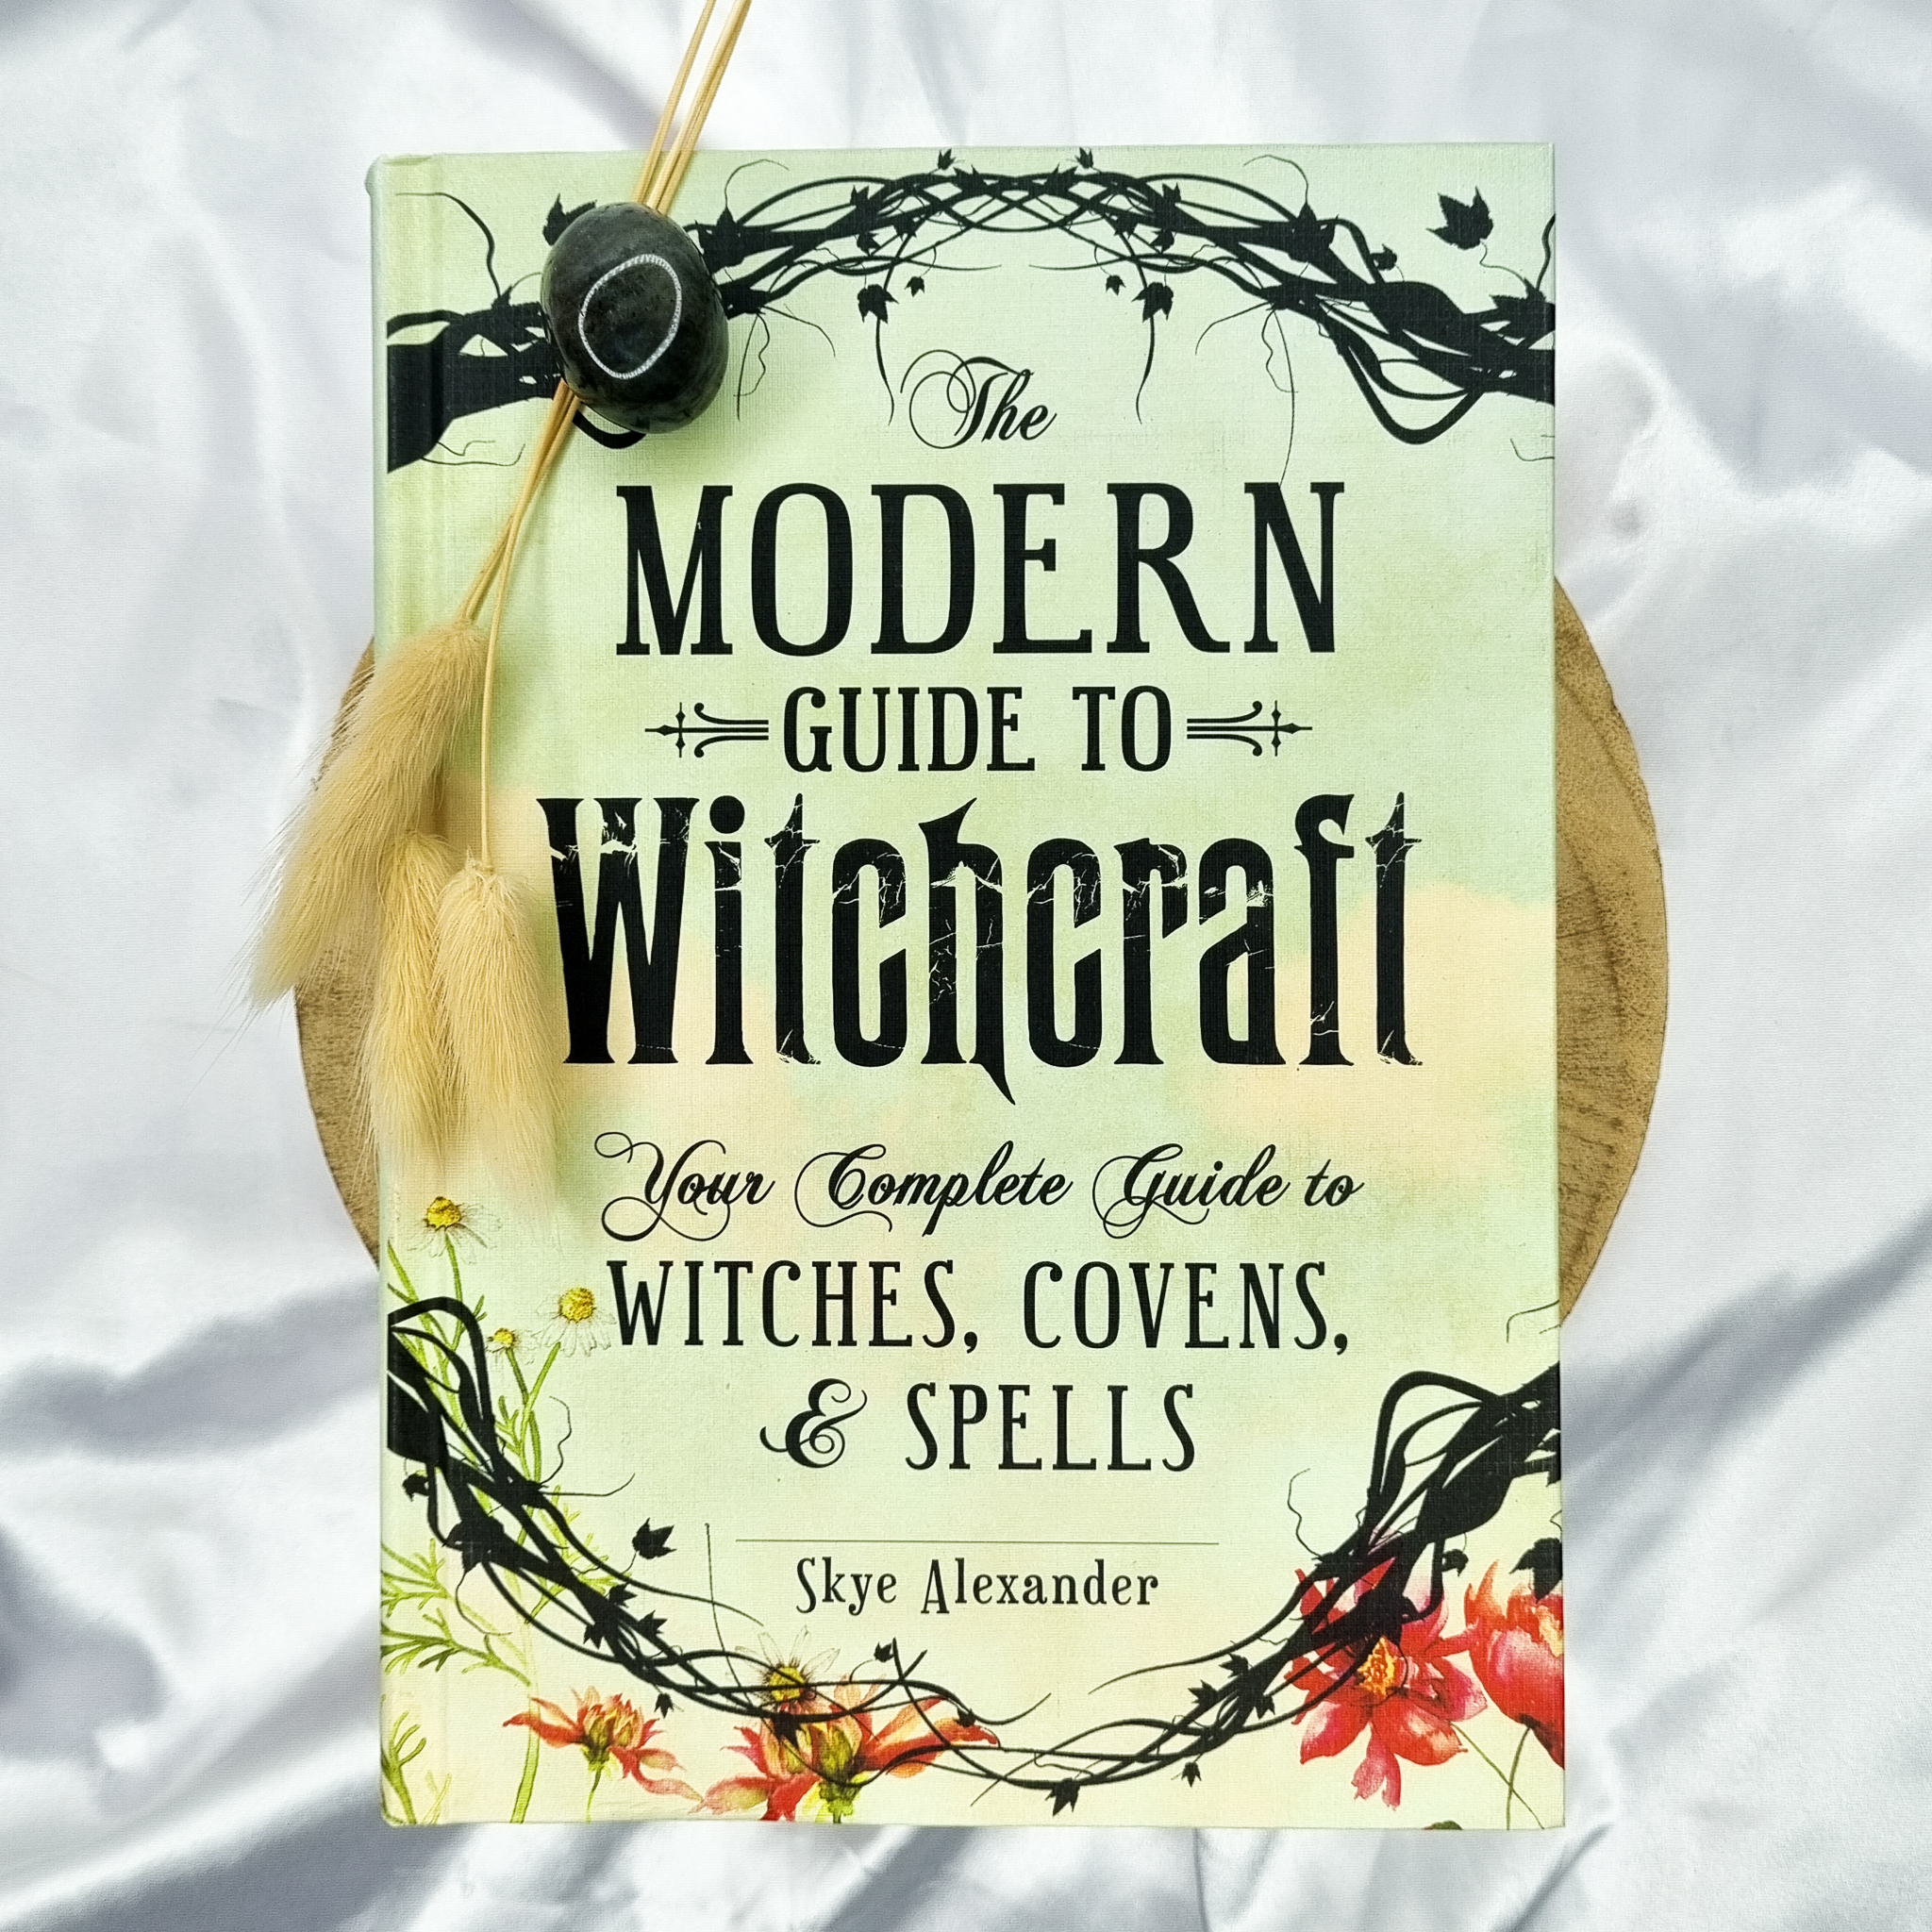 The Modern Guide To Witchcraft by Skye Alexander